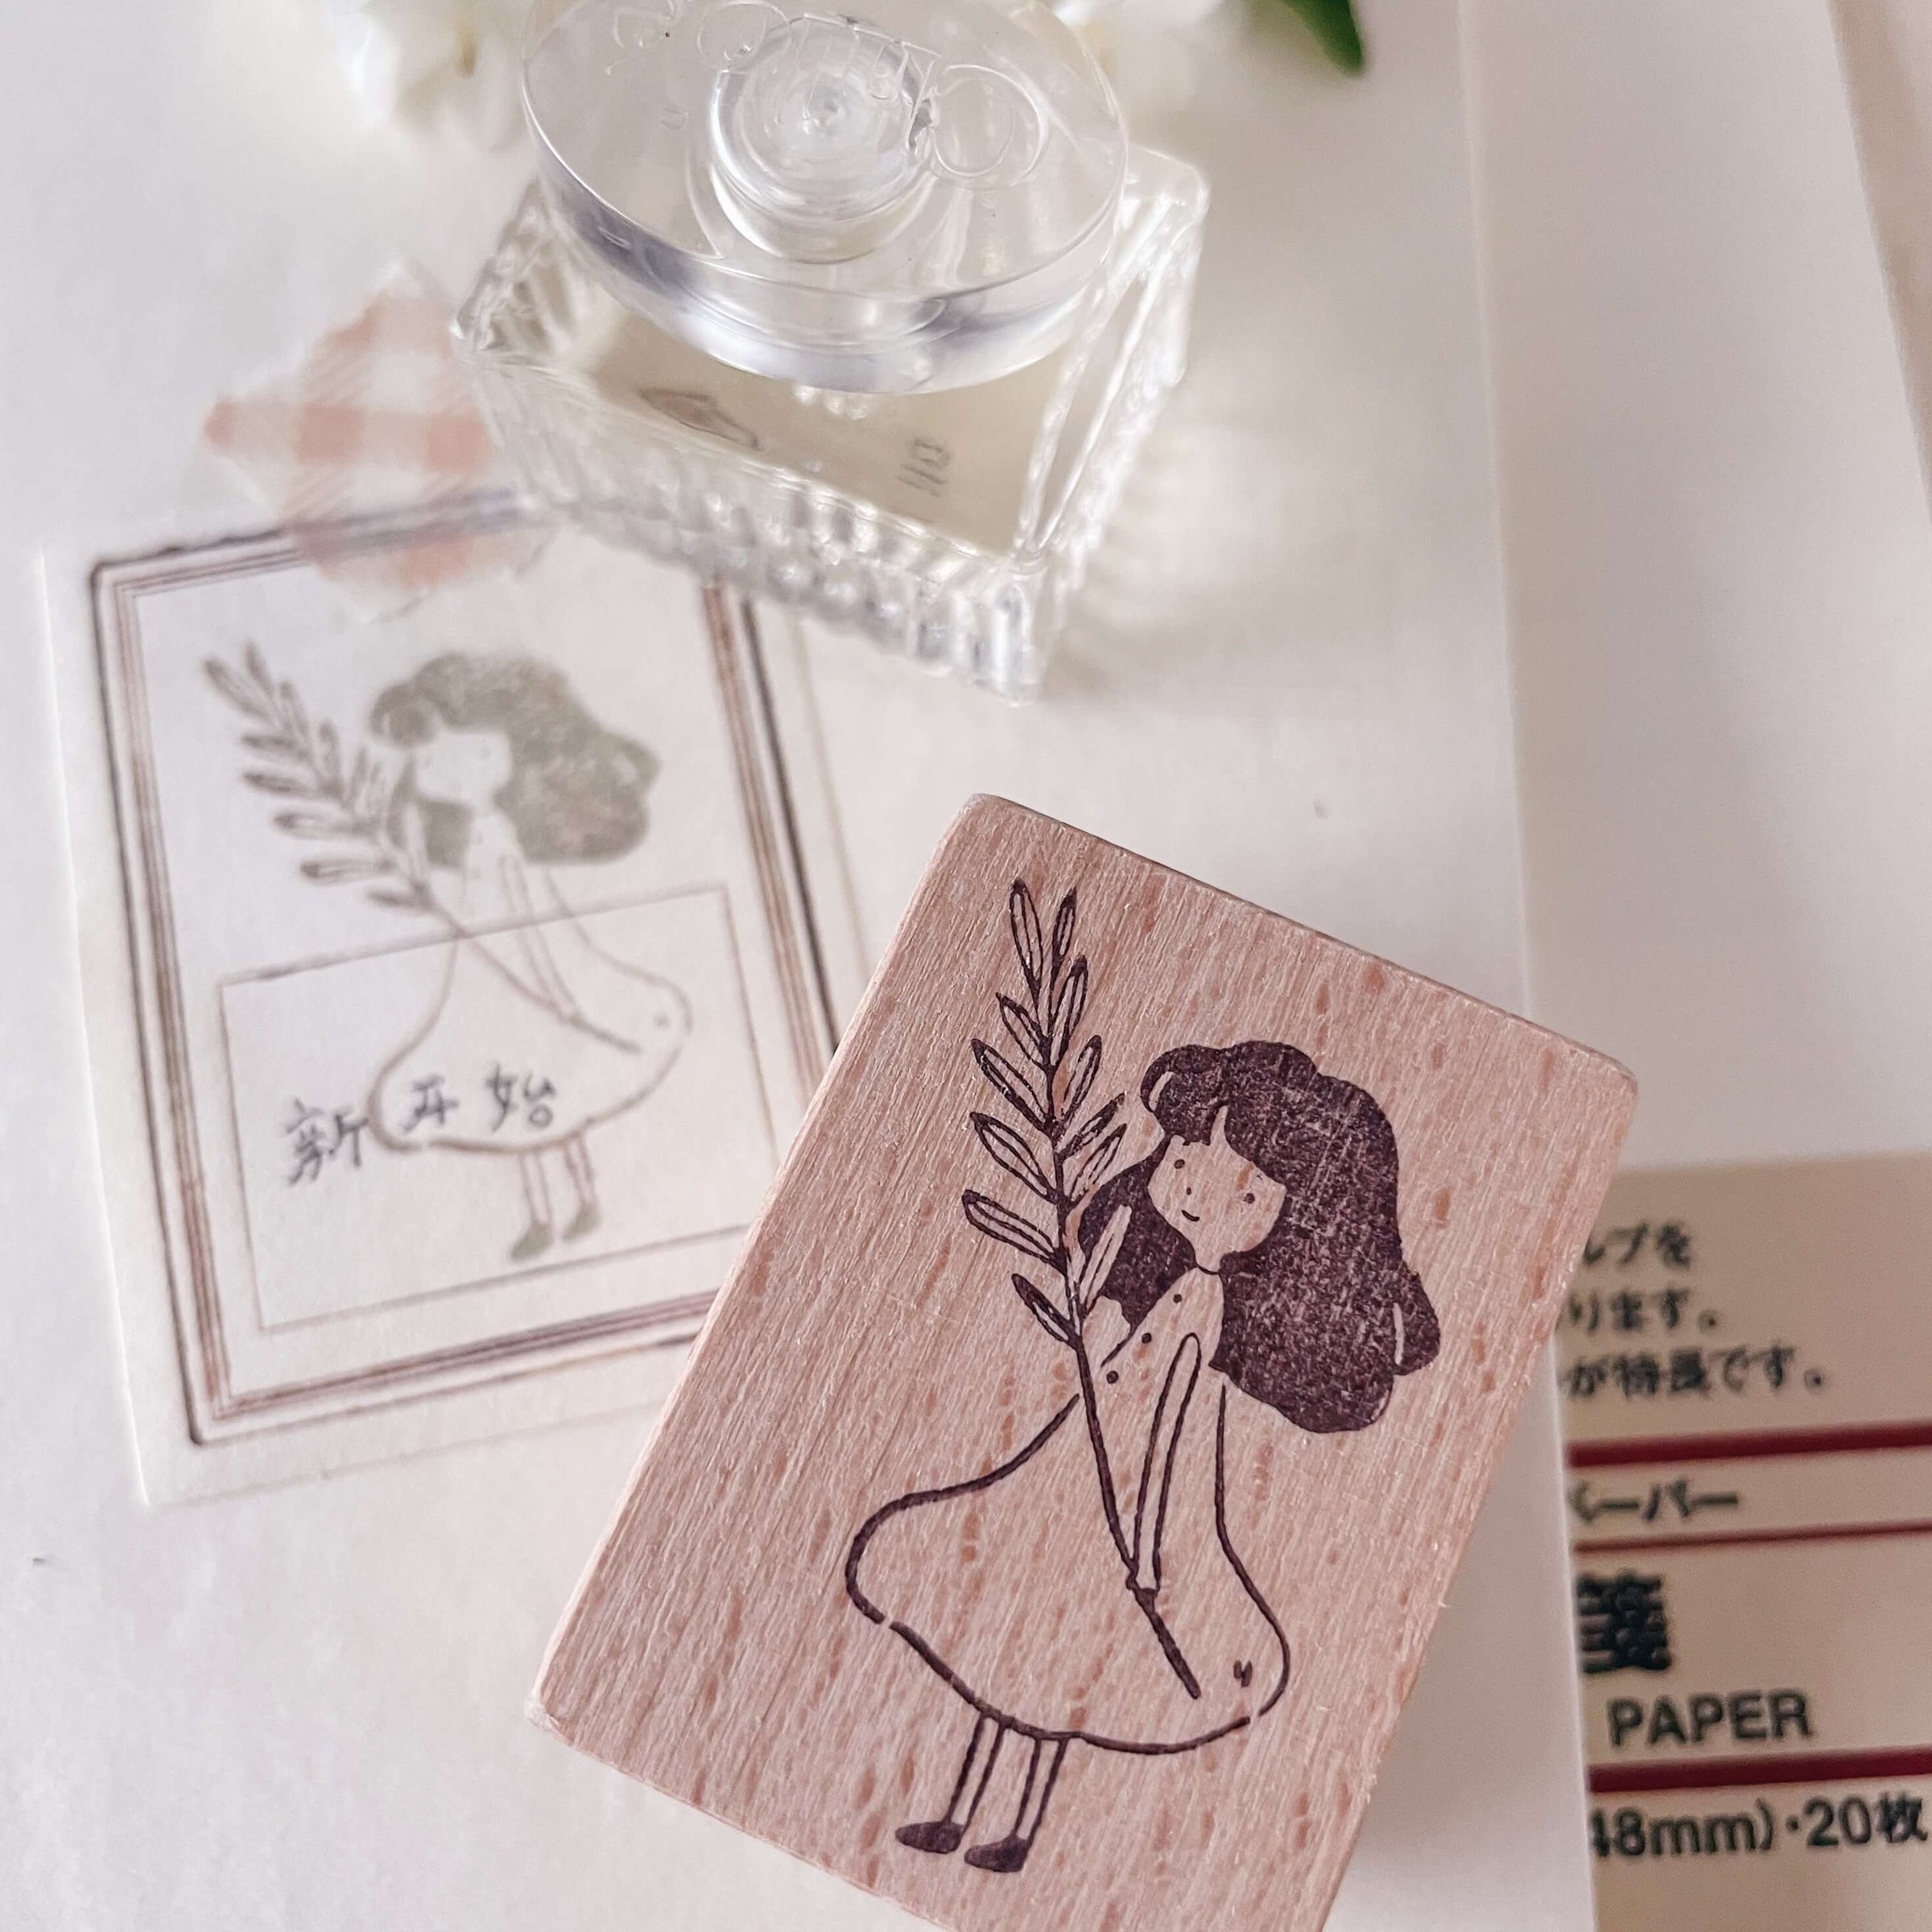 Stamp Making: An Artistic Journey